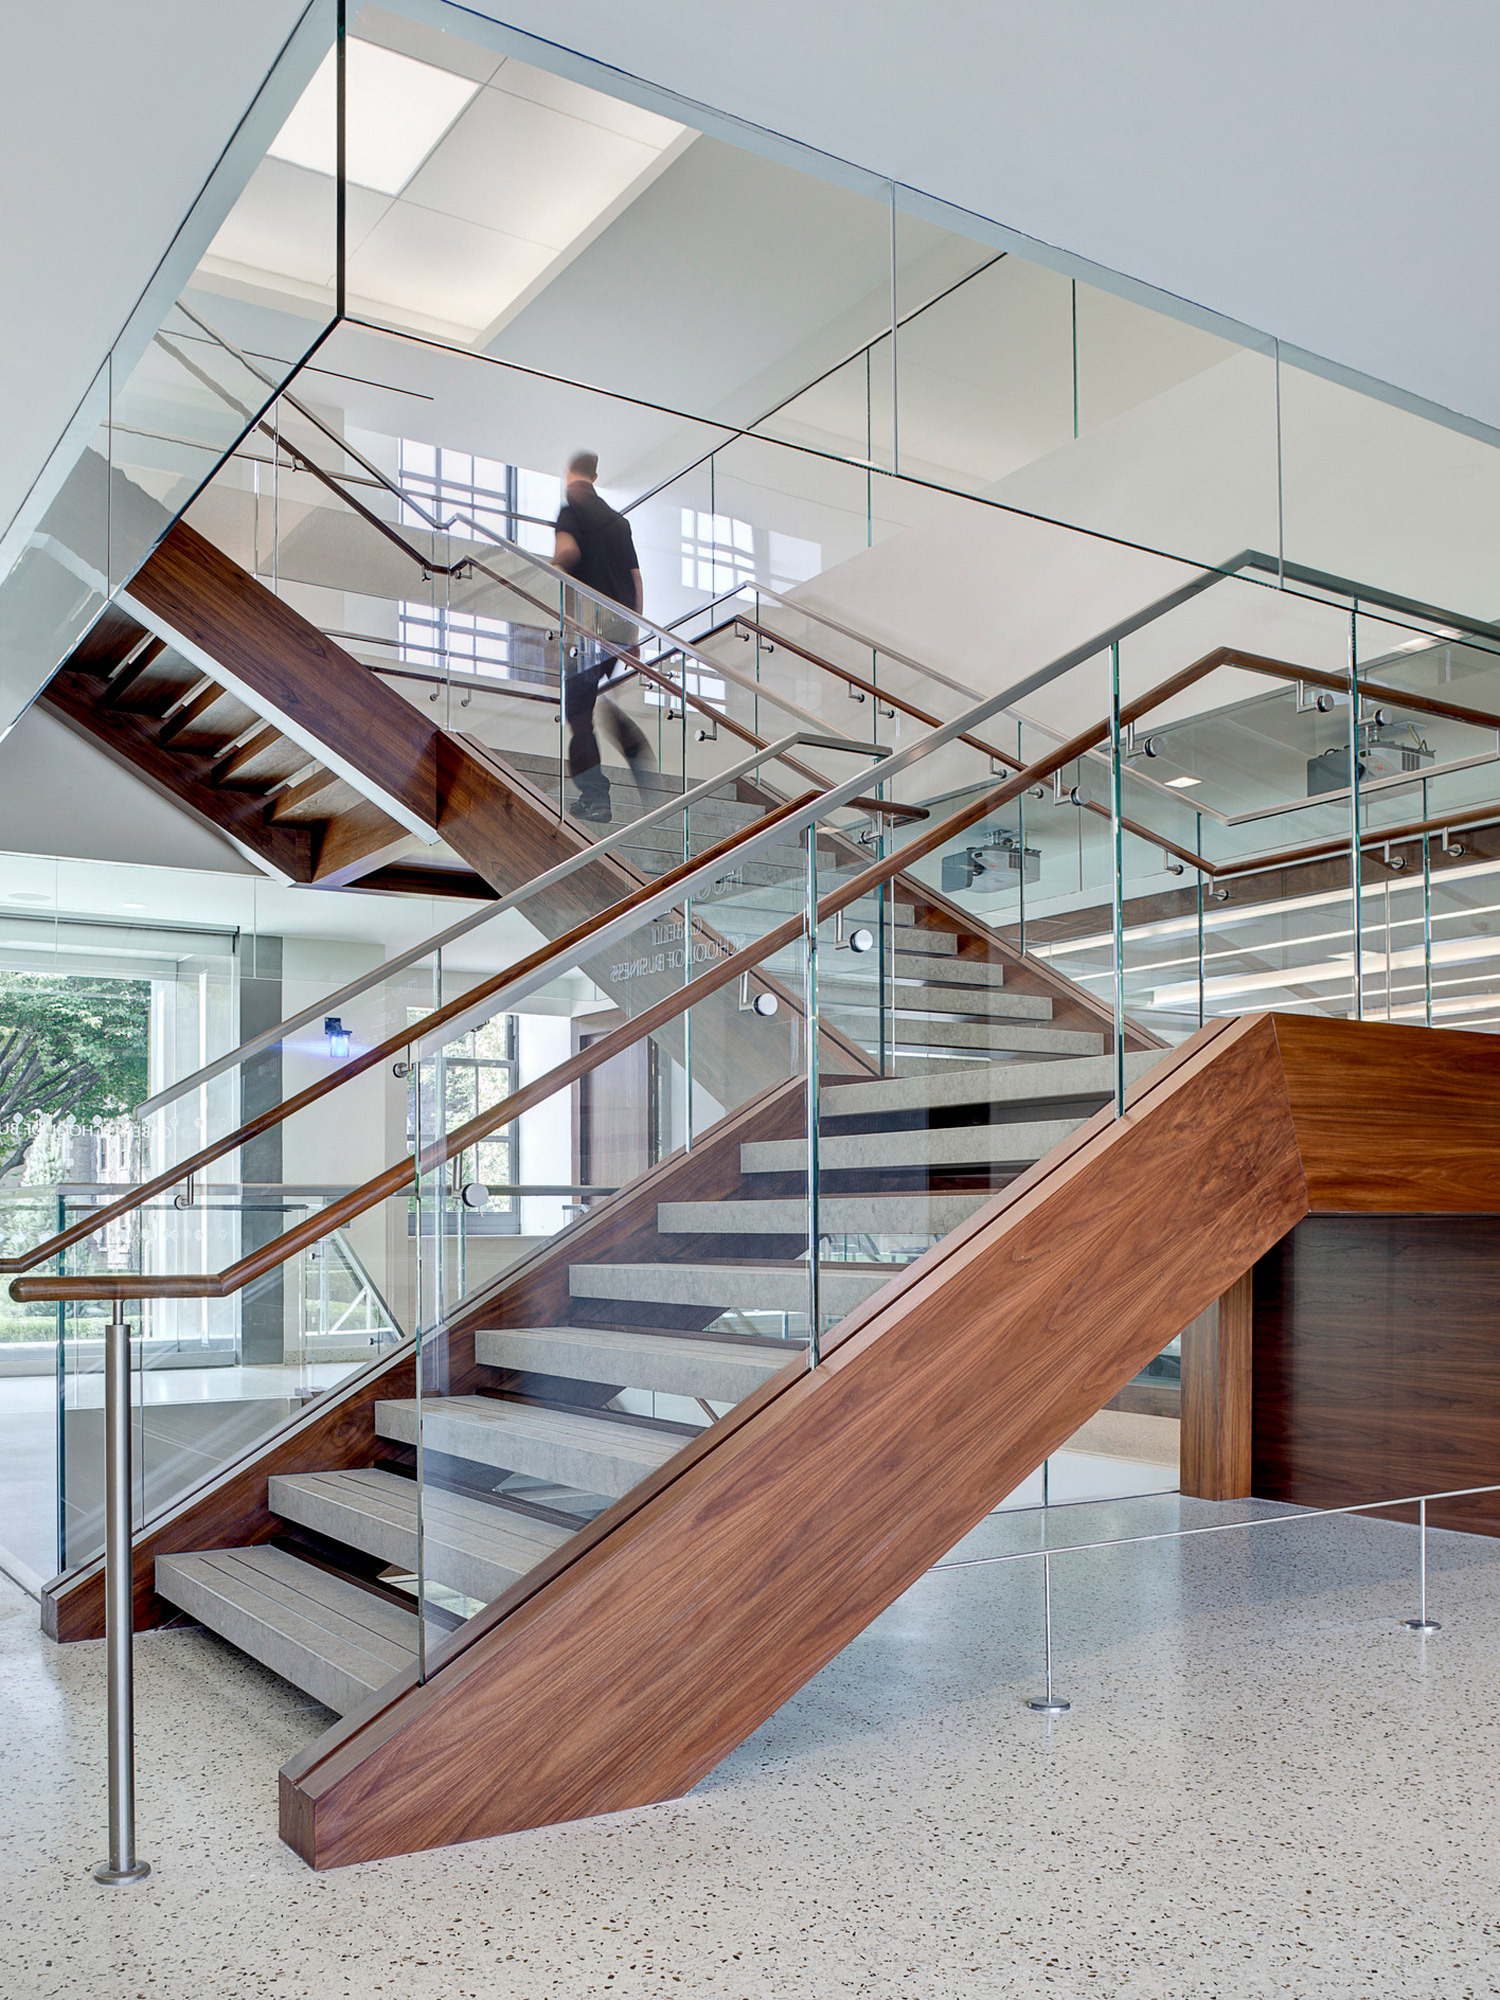 Open-concept staircase with floating wooden steps flanked by glass balustrades, enhancing spatial connectivity. The structure features brushed steel handrails and a warm, rich walnut finish, contributing to a modern, airy ambiance within a professional or residential setting.